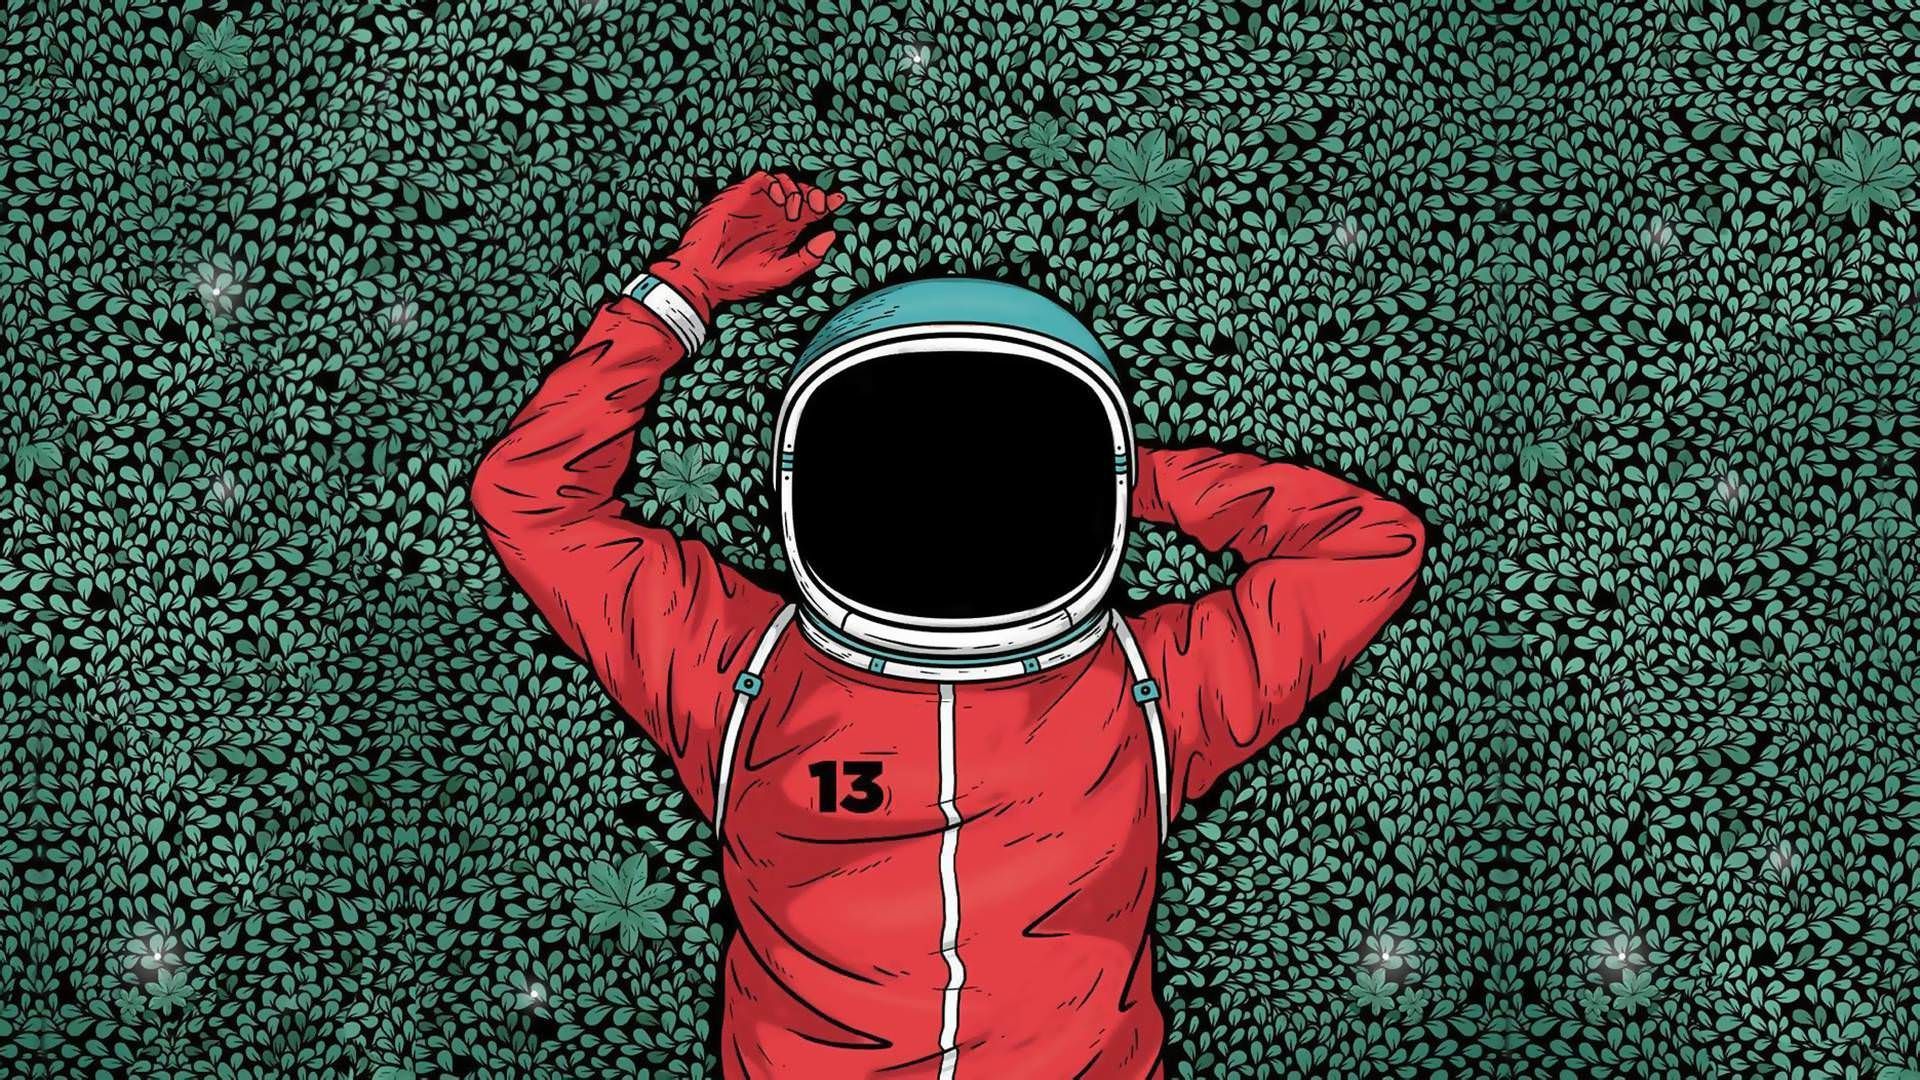 HD Astronaut Wallpaper Best Collection Enjoy And Share